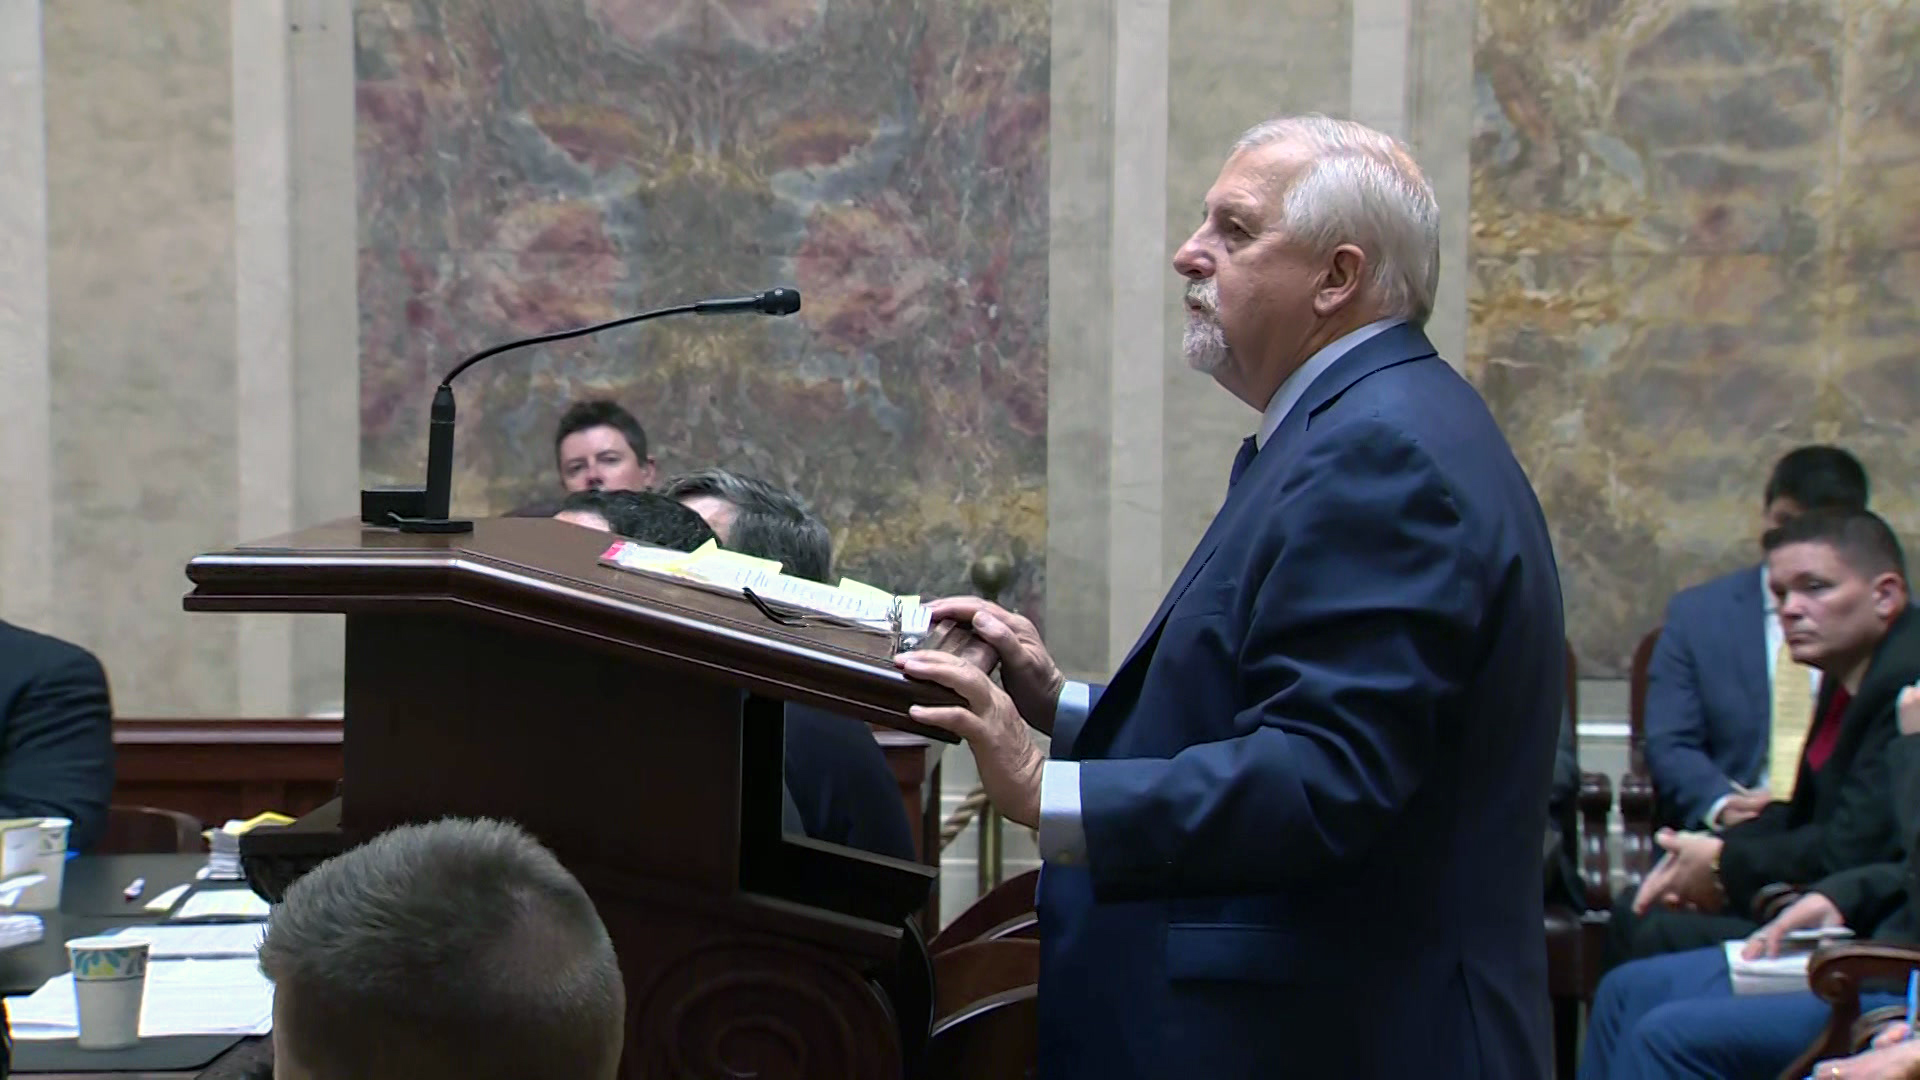 Rick Esenberg stands behind a wood podium with a microphone and speaks with other people seated in front of and behind him, in a room with marble masonry.